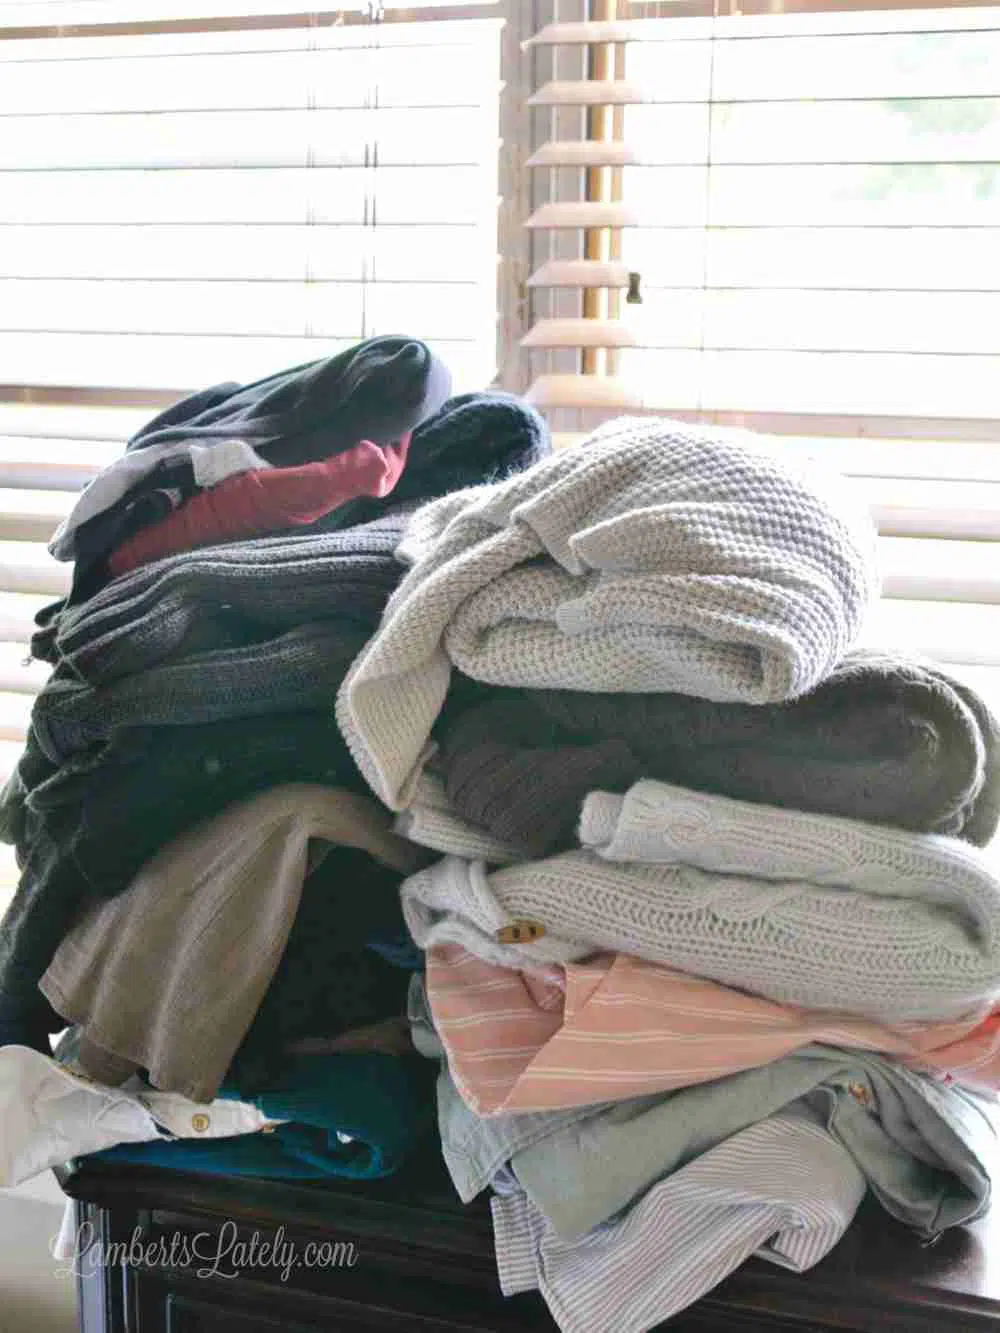 clothes folded in front of a window.